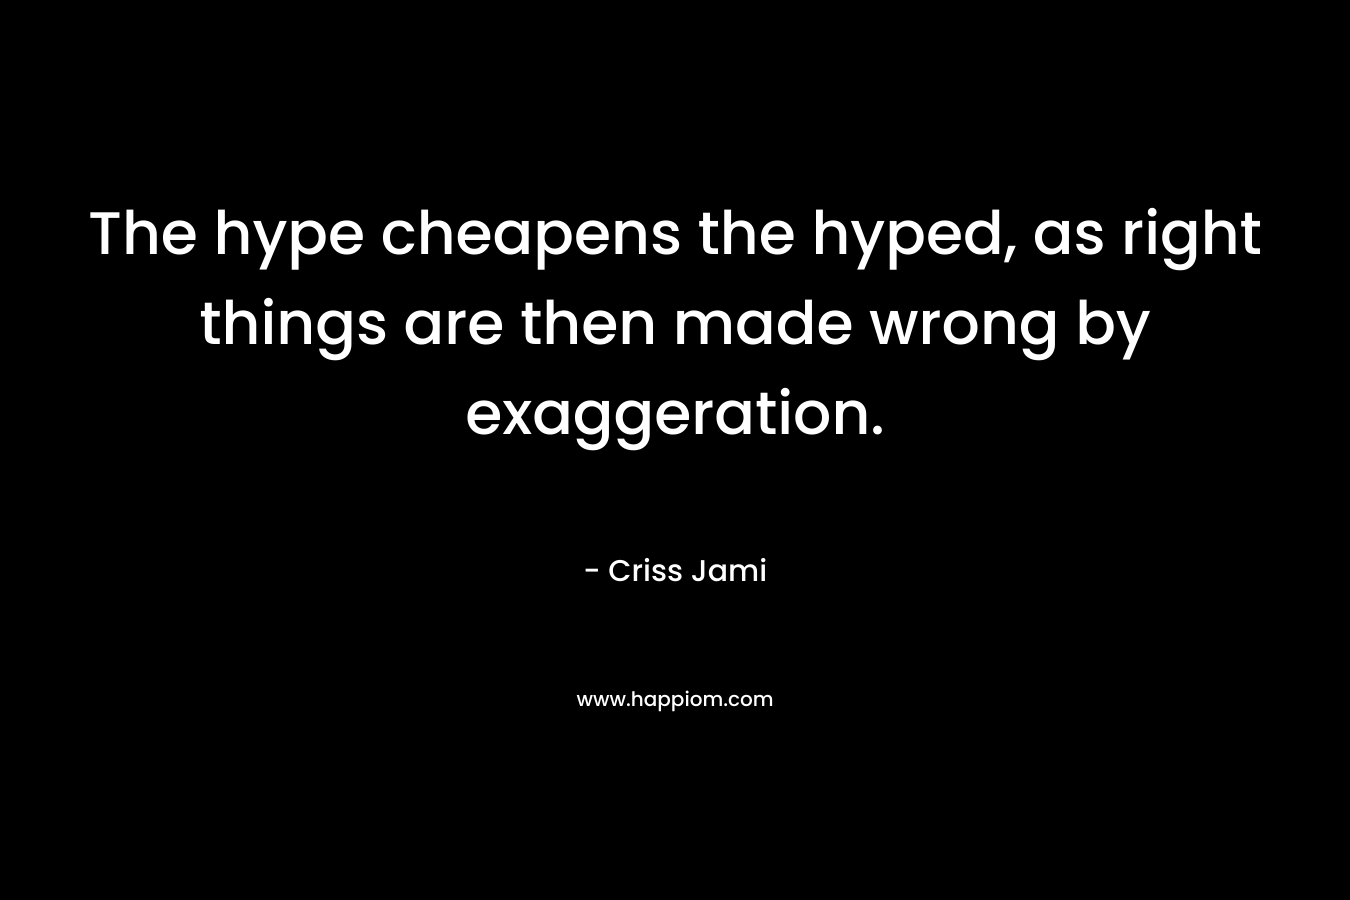 The hype cheapens the hyped, as right things are then made wrong by exaggeration.